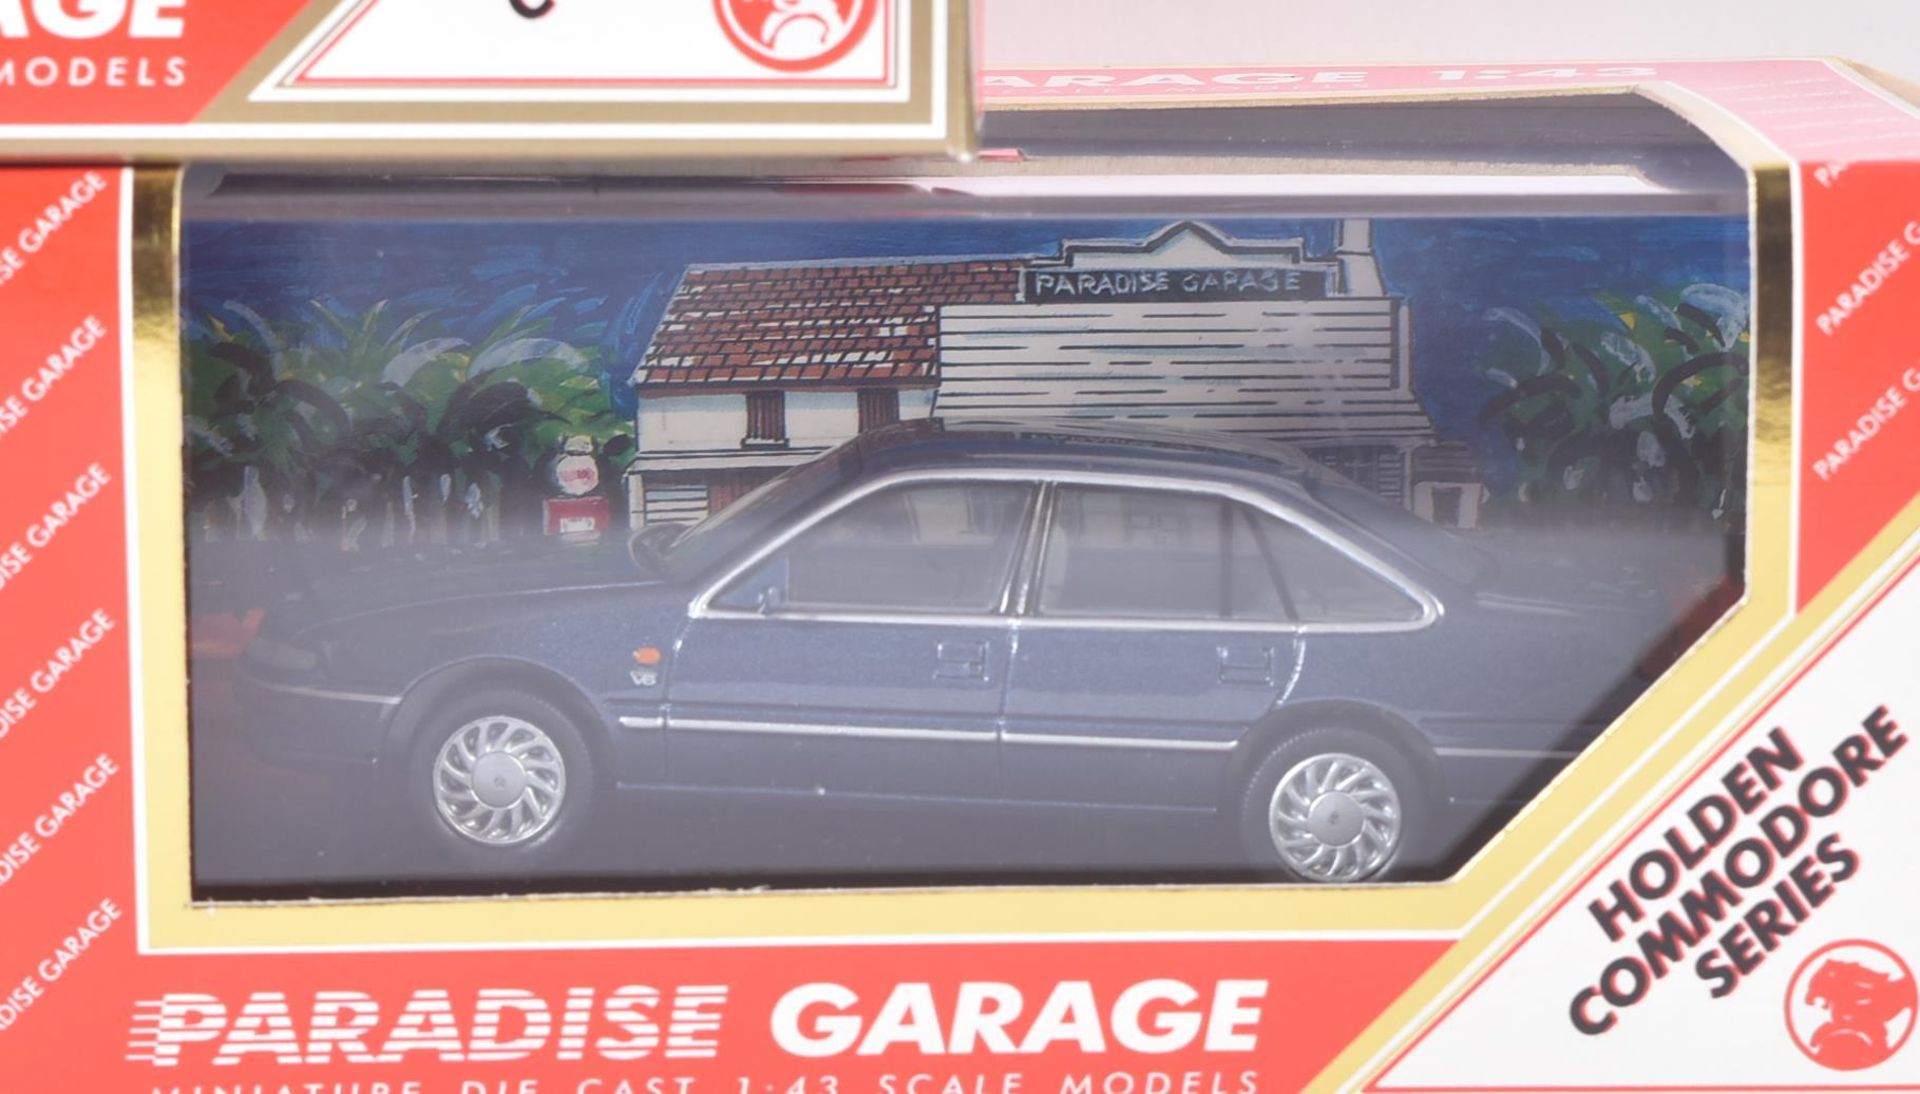 PARADISE GARAGE - 1/43 SCALE PRECISION DIECAST MODELS - Image 2 of 5